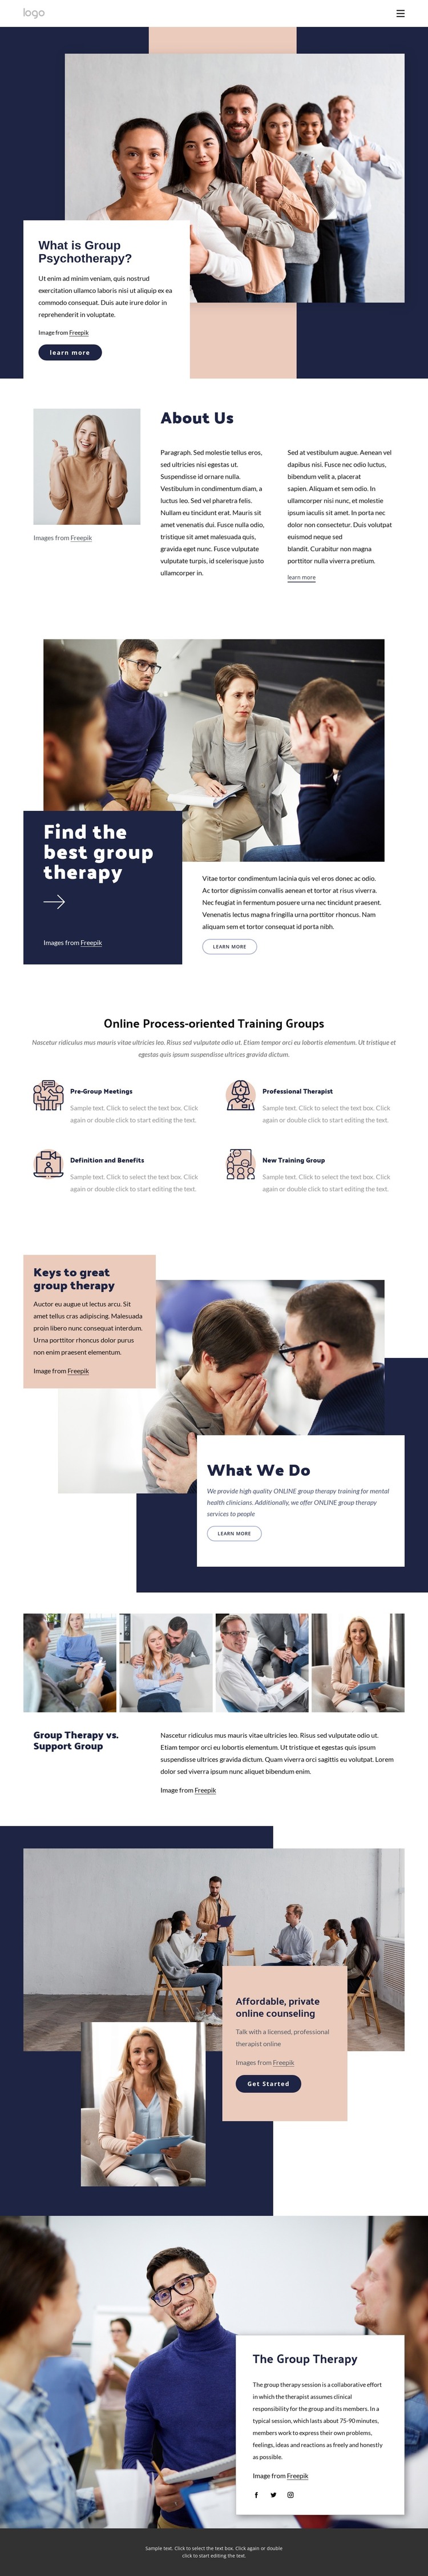 Different types of group therapy Web Design